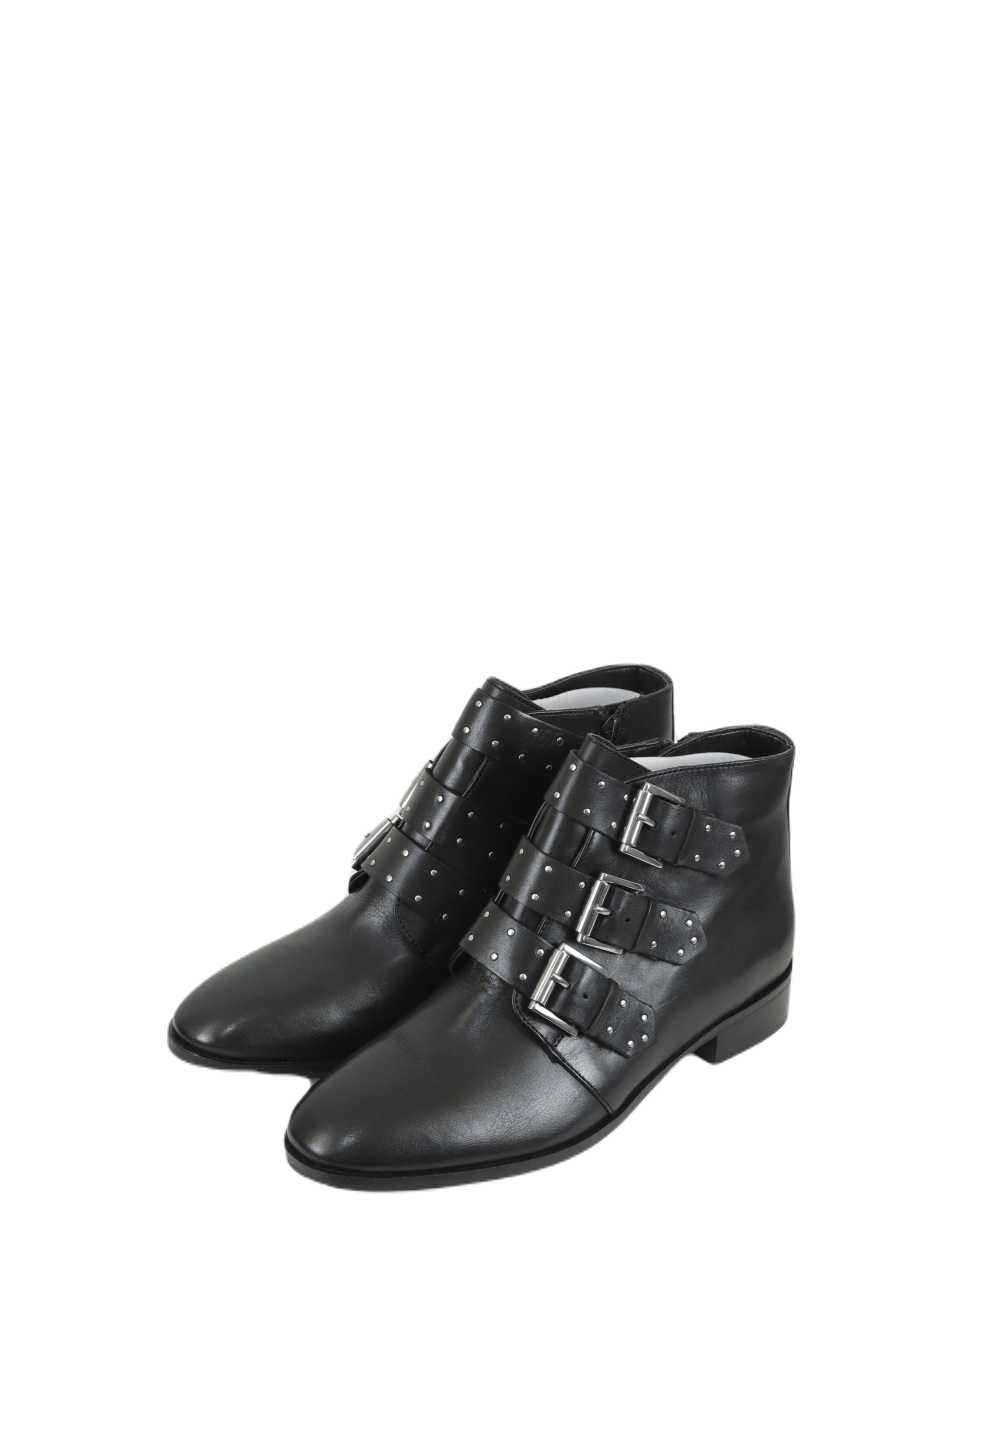 Asos Black Boots With Studs And Buckles 9